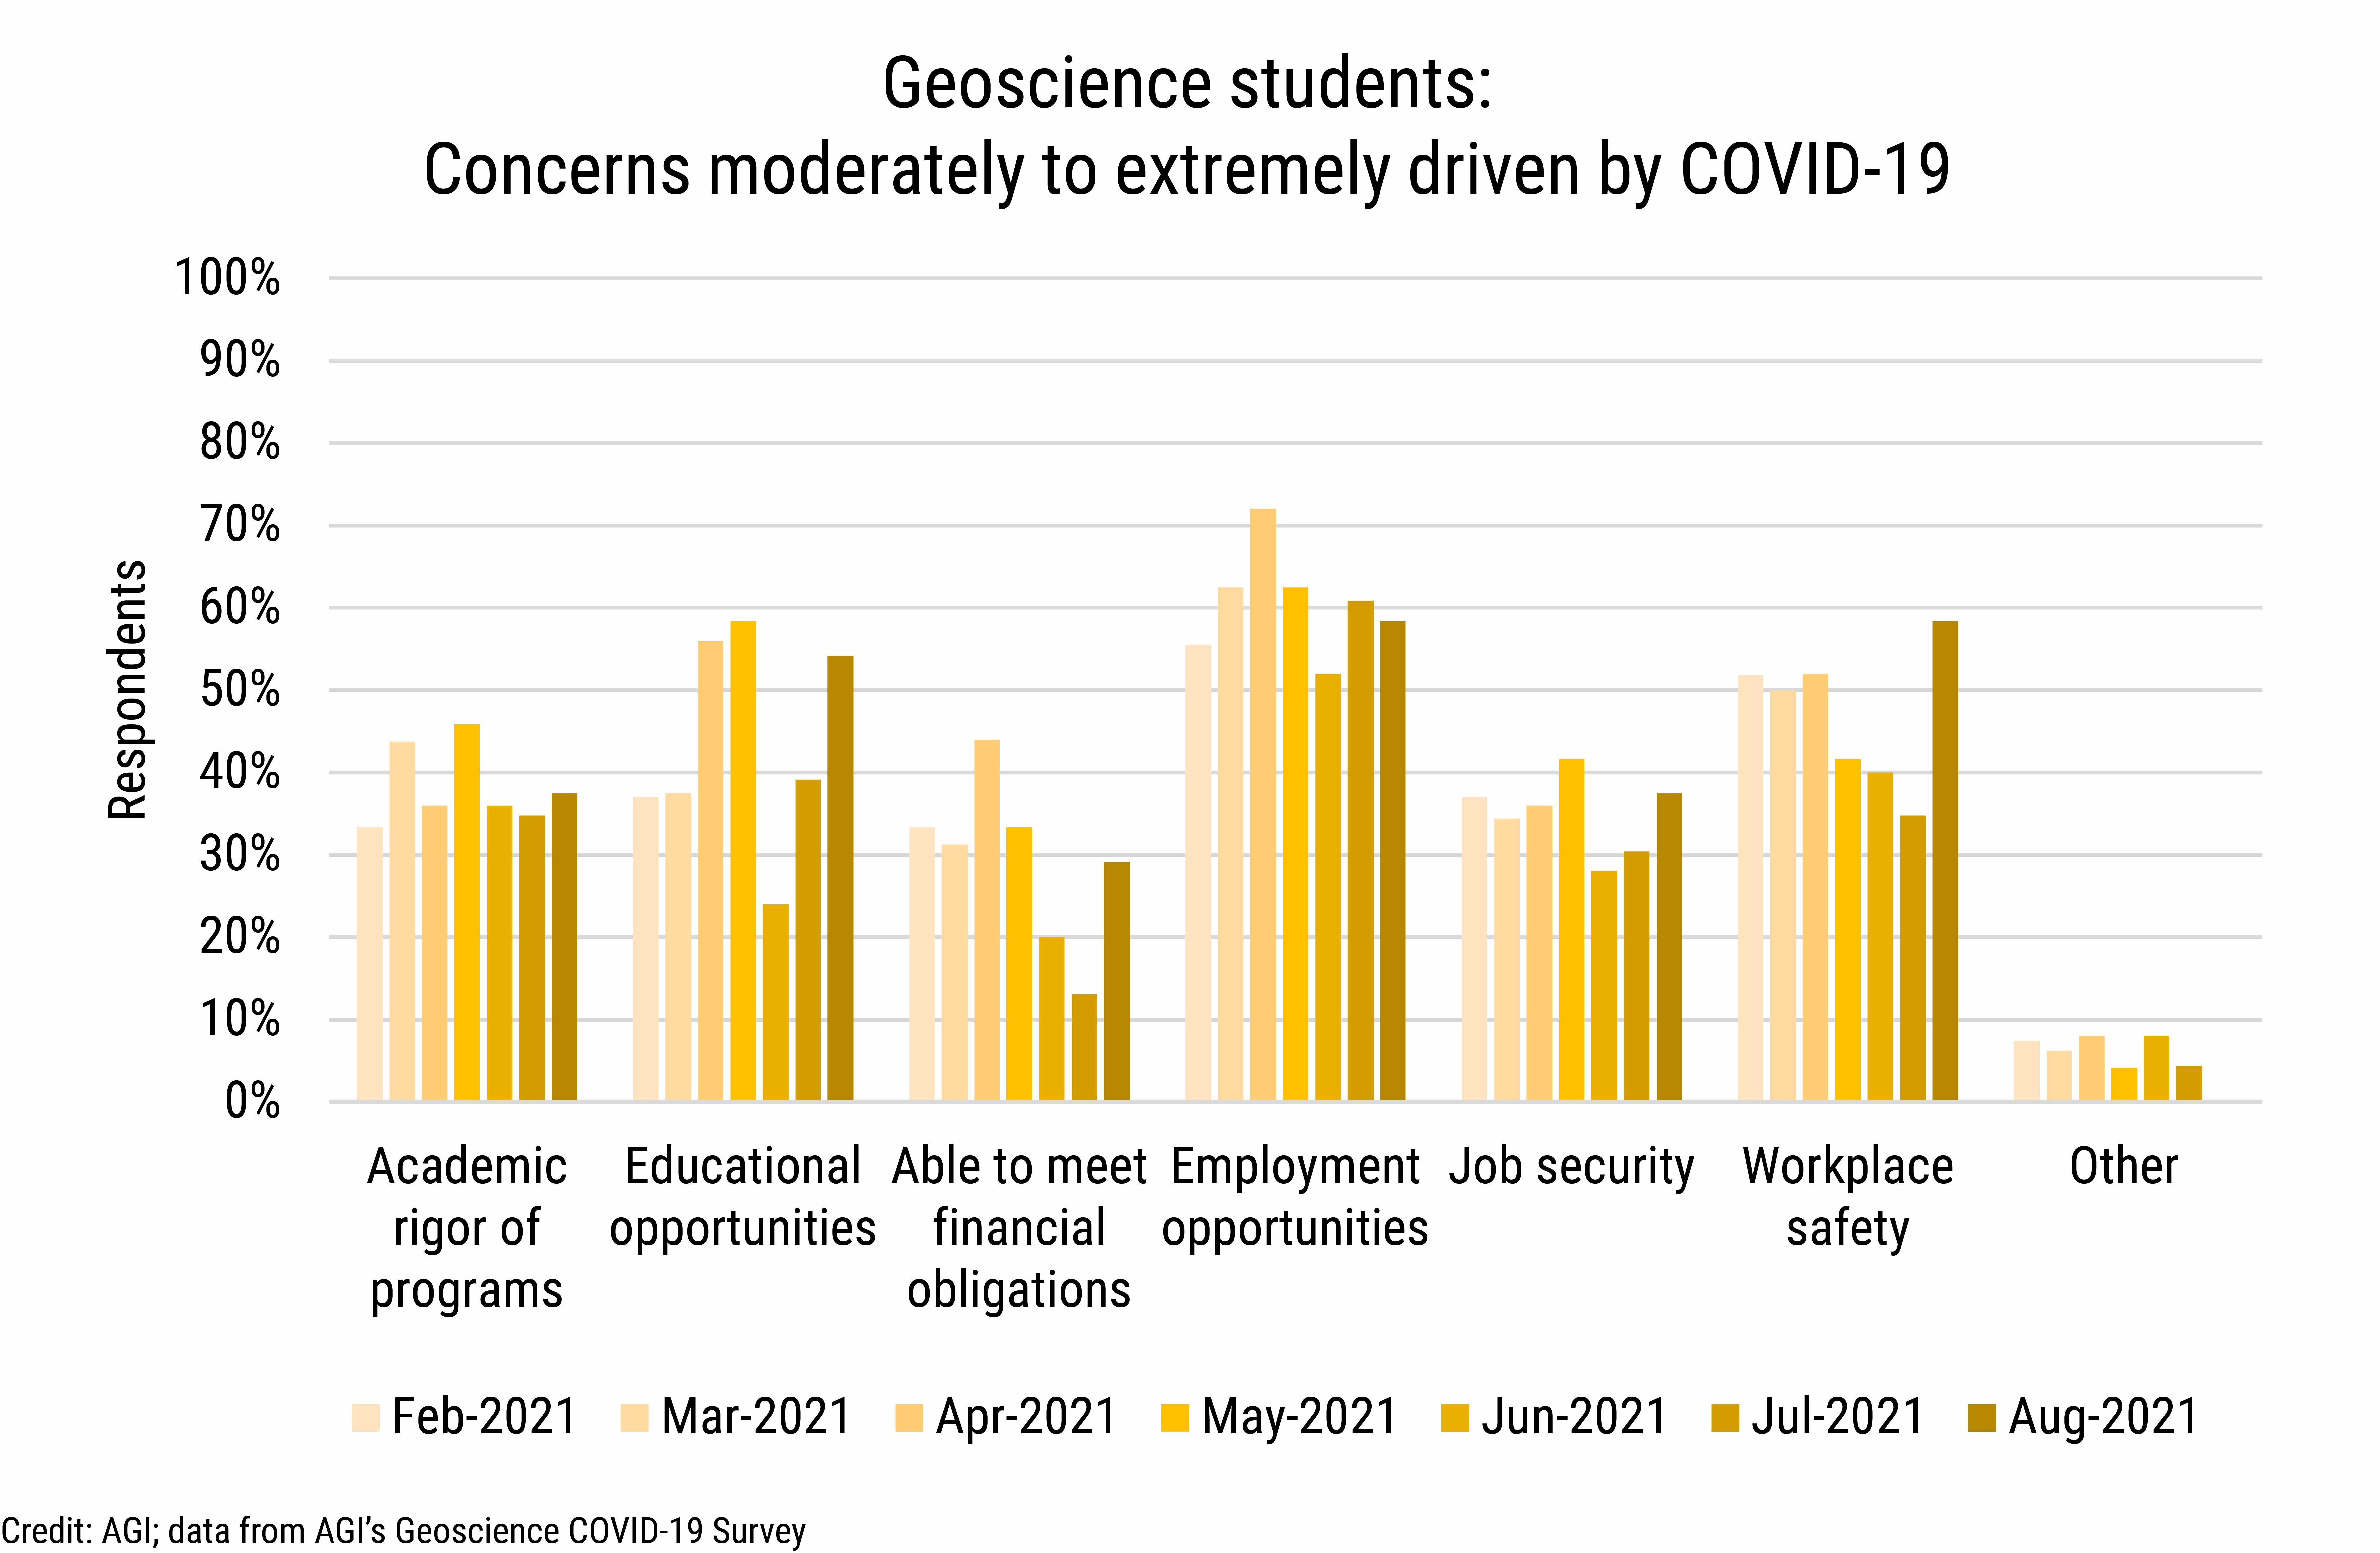 DB_2021-031 chart 08: Geoscience students: Concerns moderately to extremely driven by COVID-19 (Credit: AGI; data from AGI's Geoscience COVID-19 Survey)